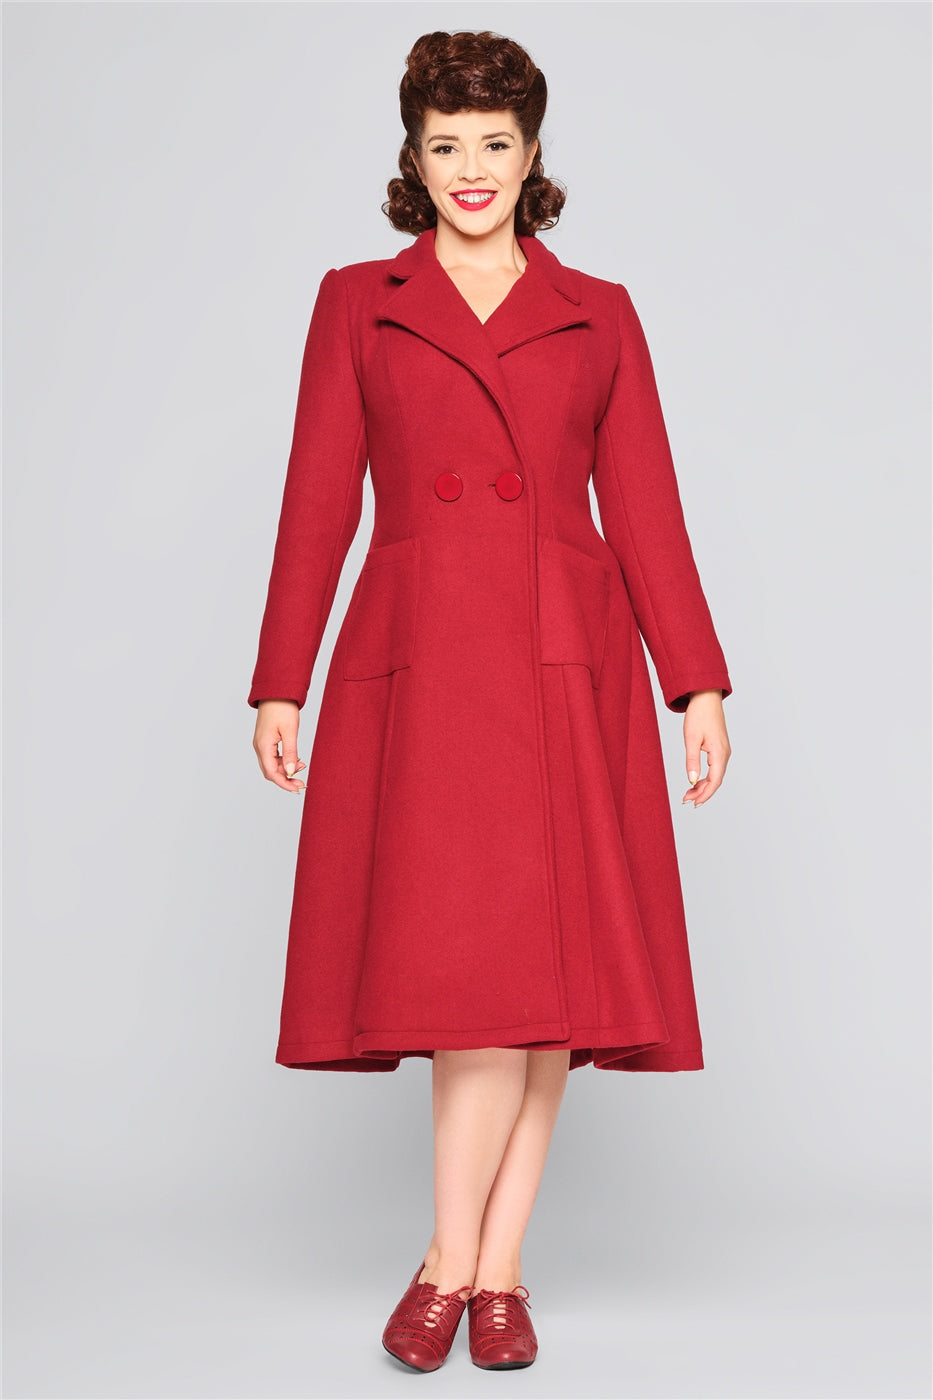 Smiling vintage model with brown hair in a classy updo wearing a burgundy winter coat with a fitted waist and flared skirt